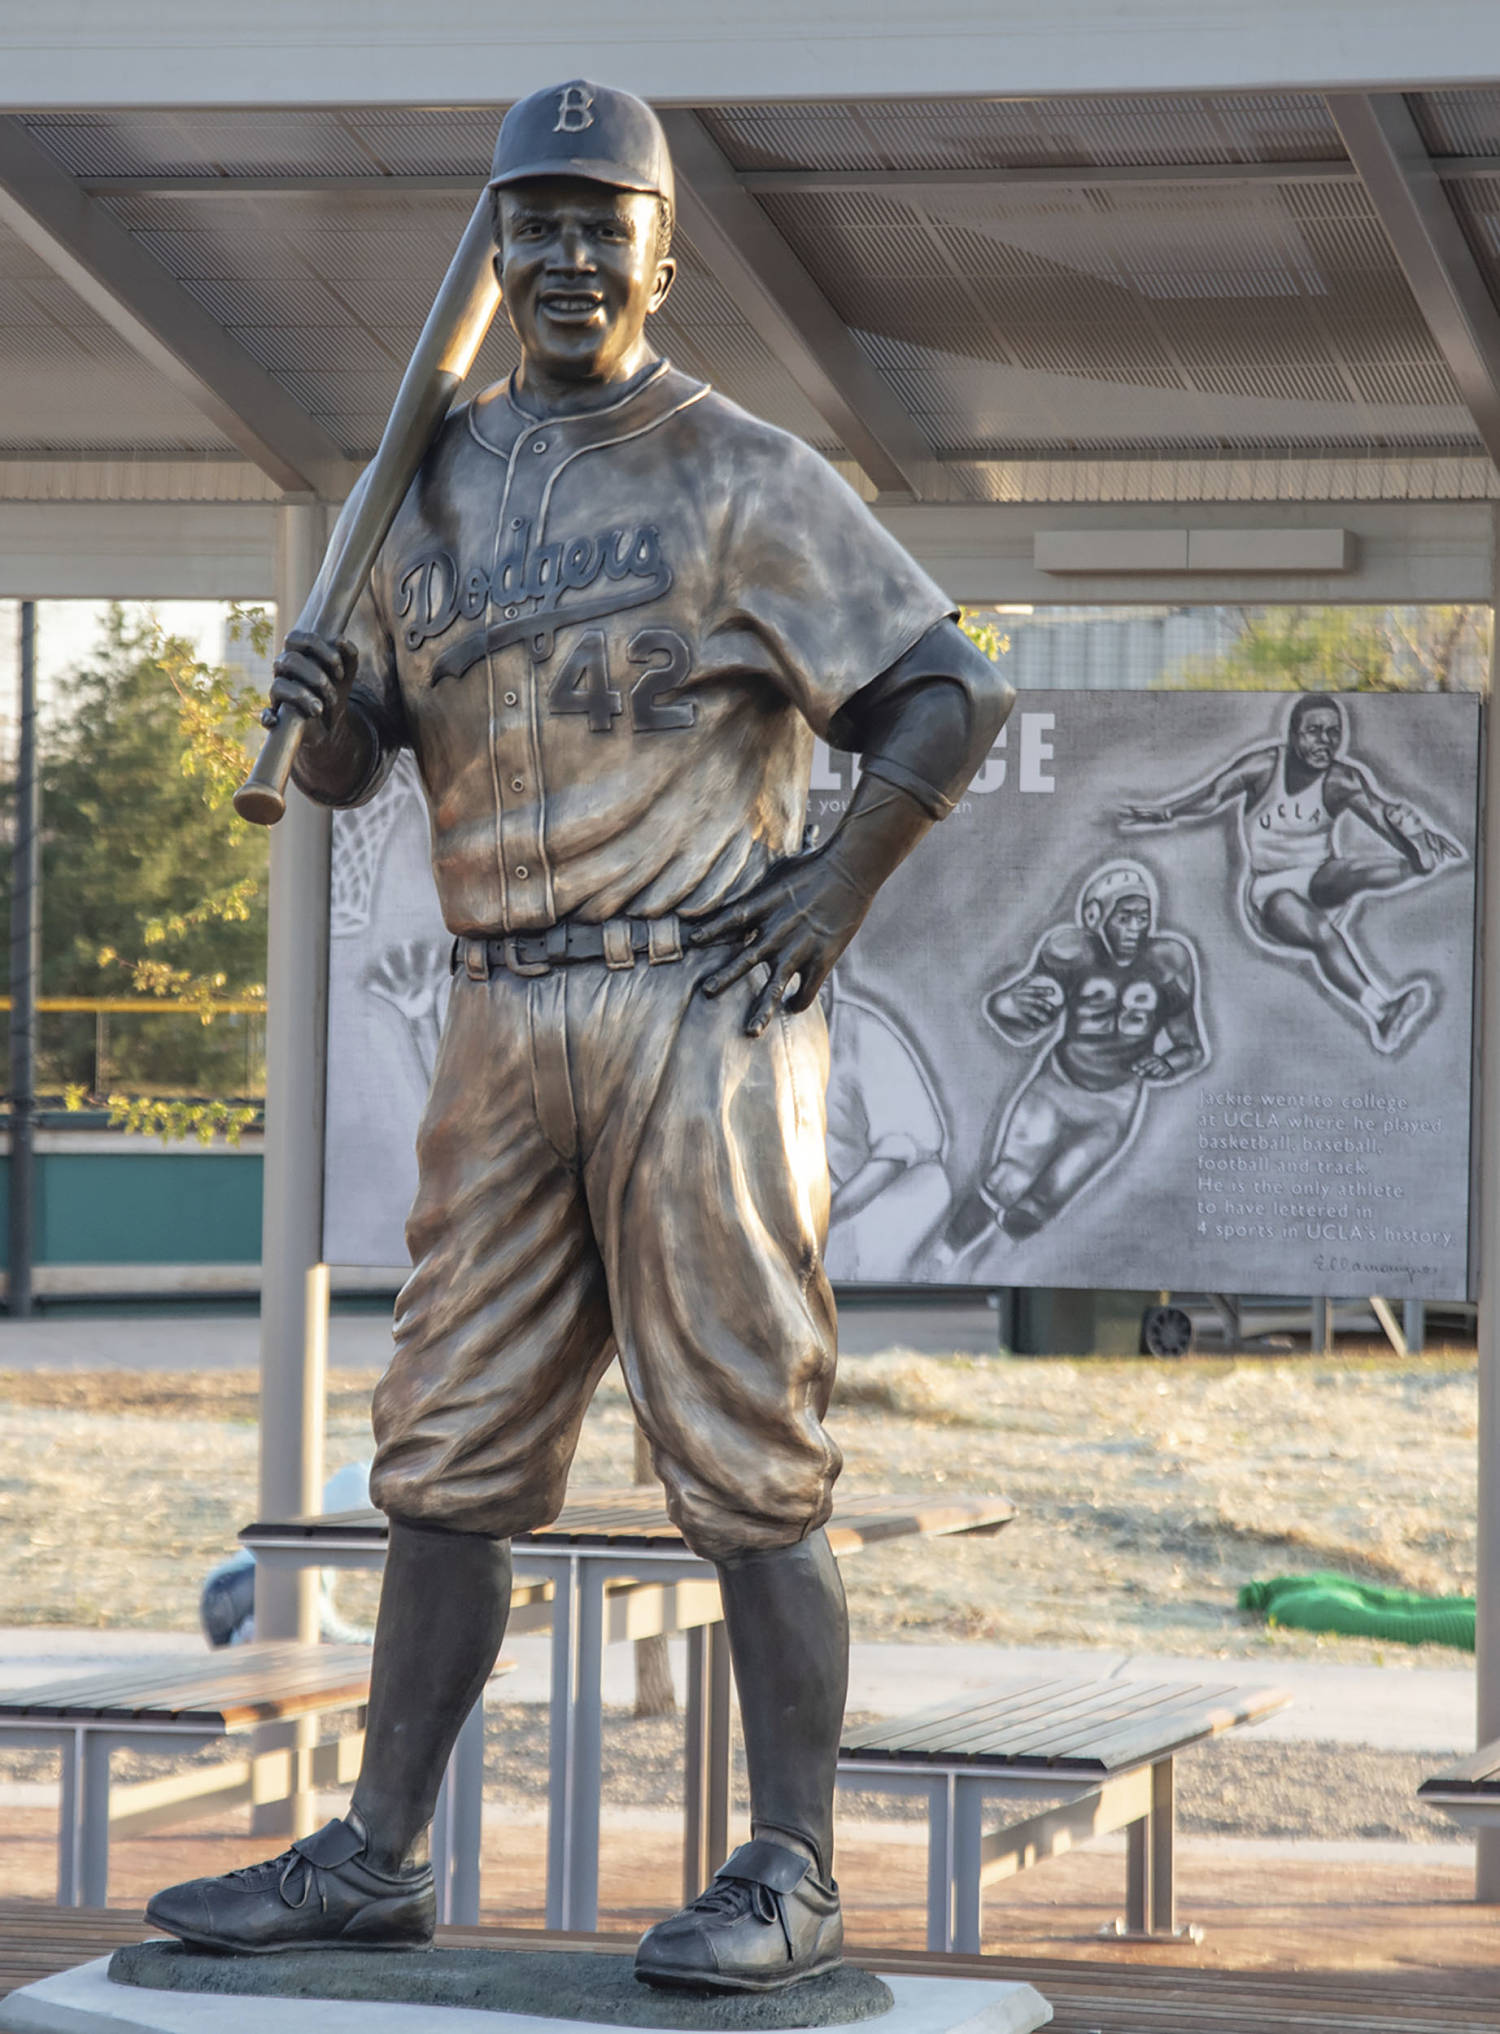 Community rallies to replace a Jackie Robinson statue after it was stolen from a little league park